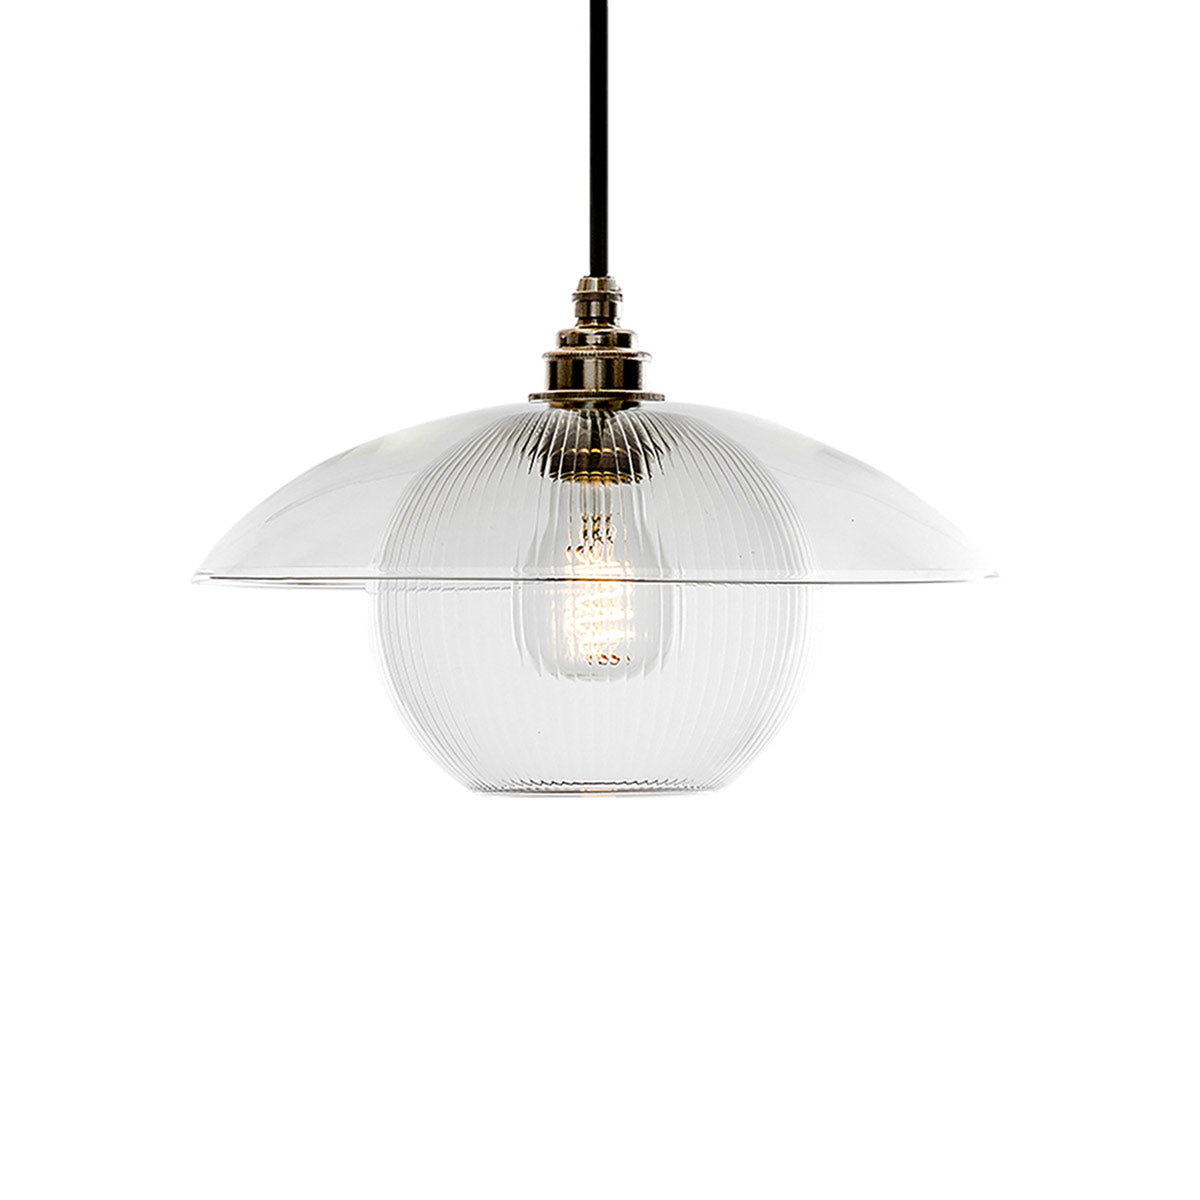 Bexley Pendant V1 glass pendant lighting made by Leverint and sold by South Charlotte Fine Lighting